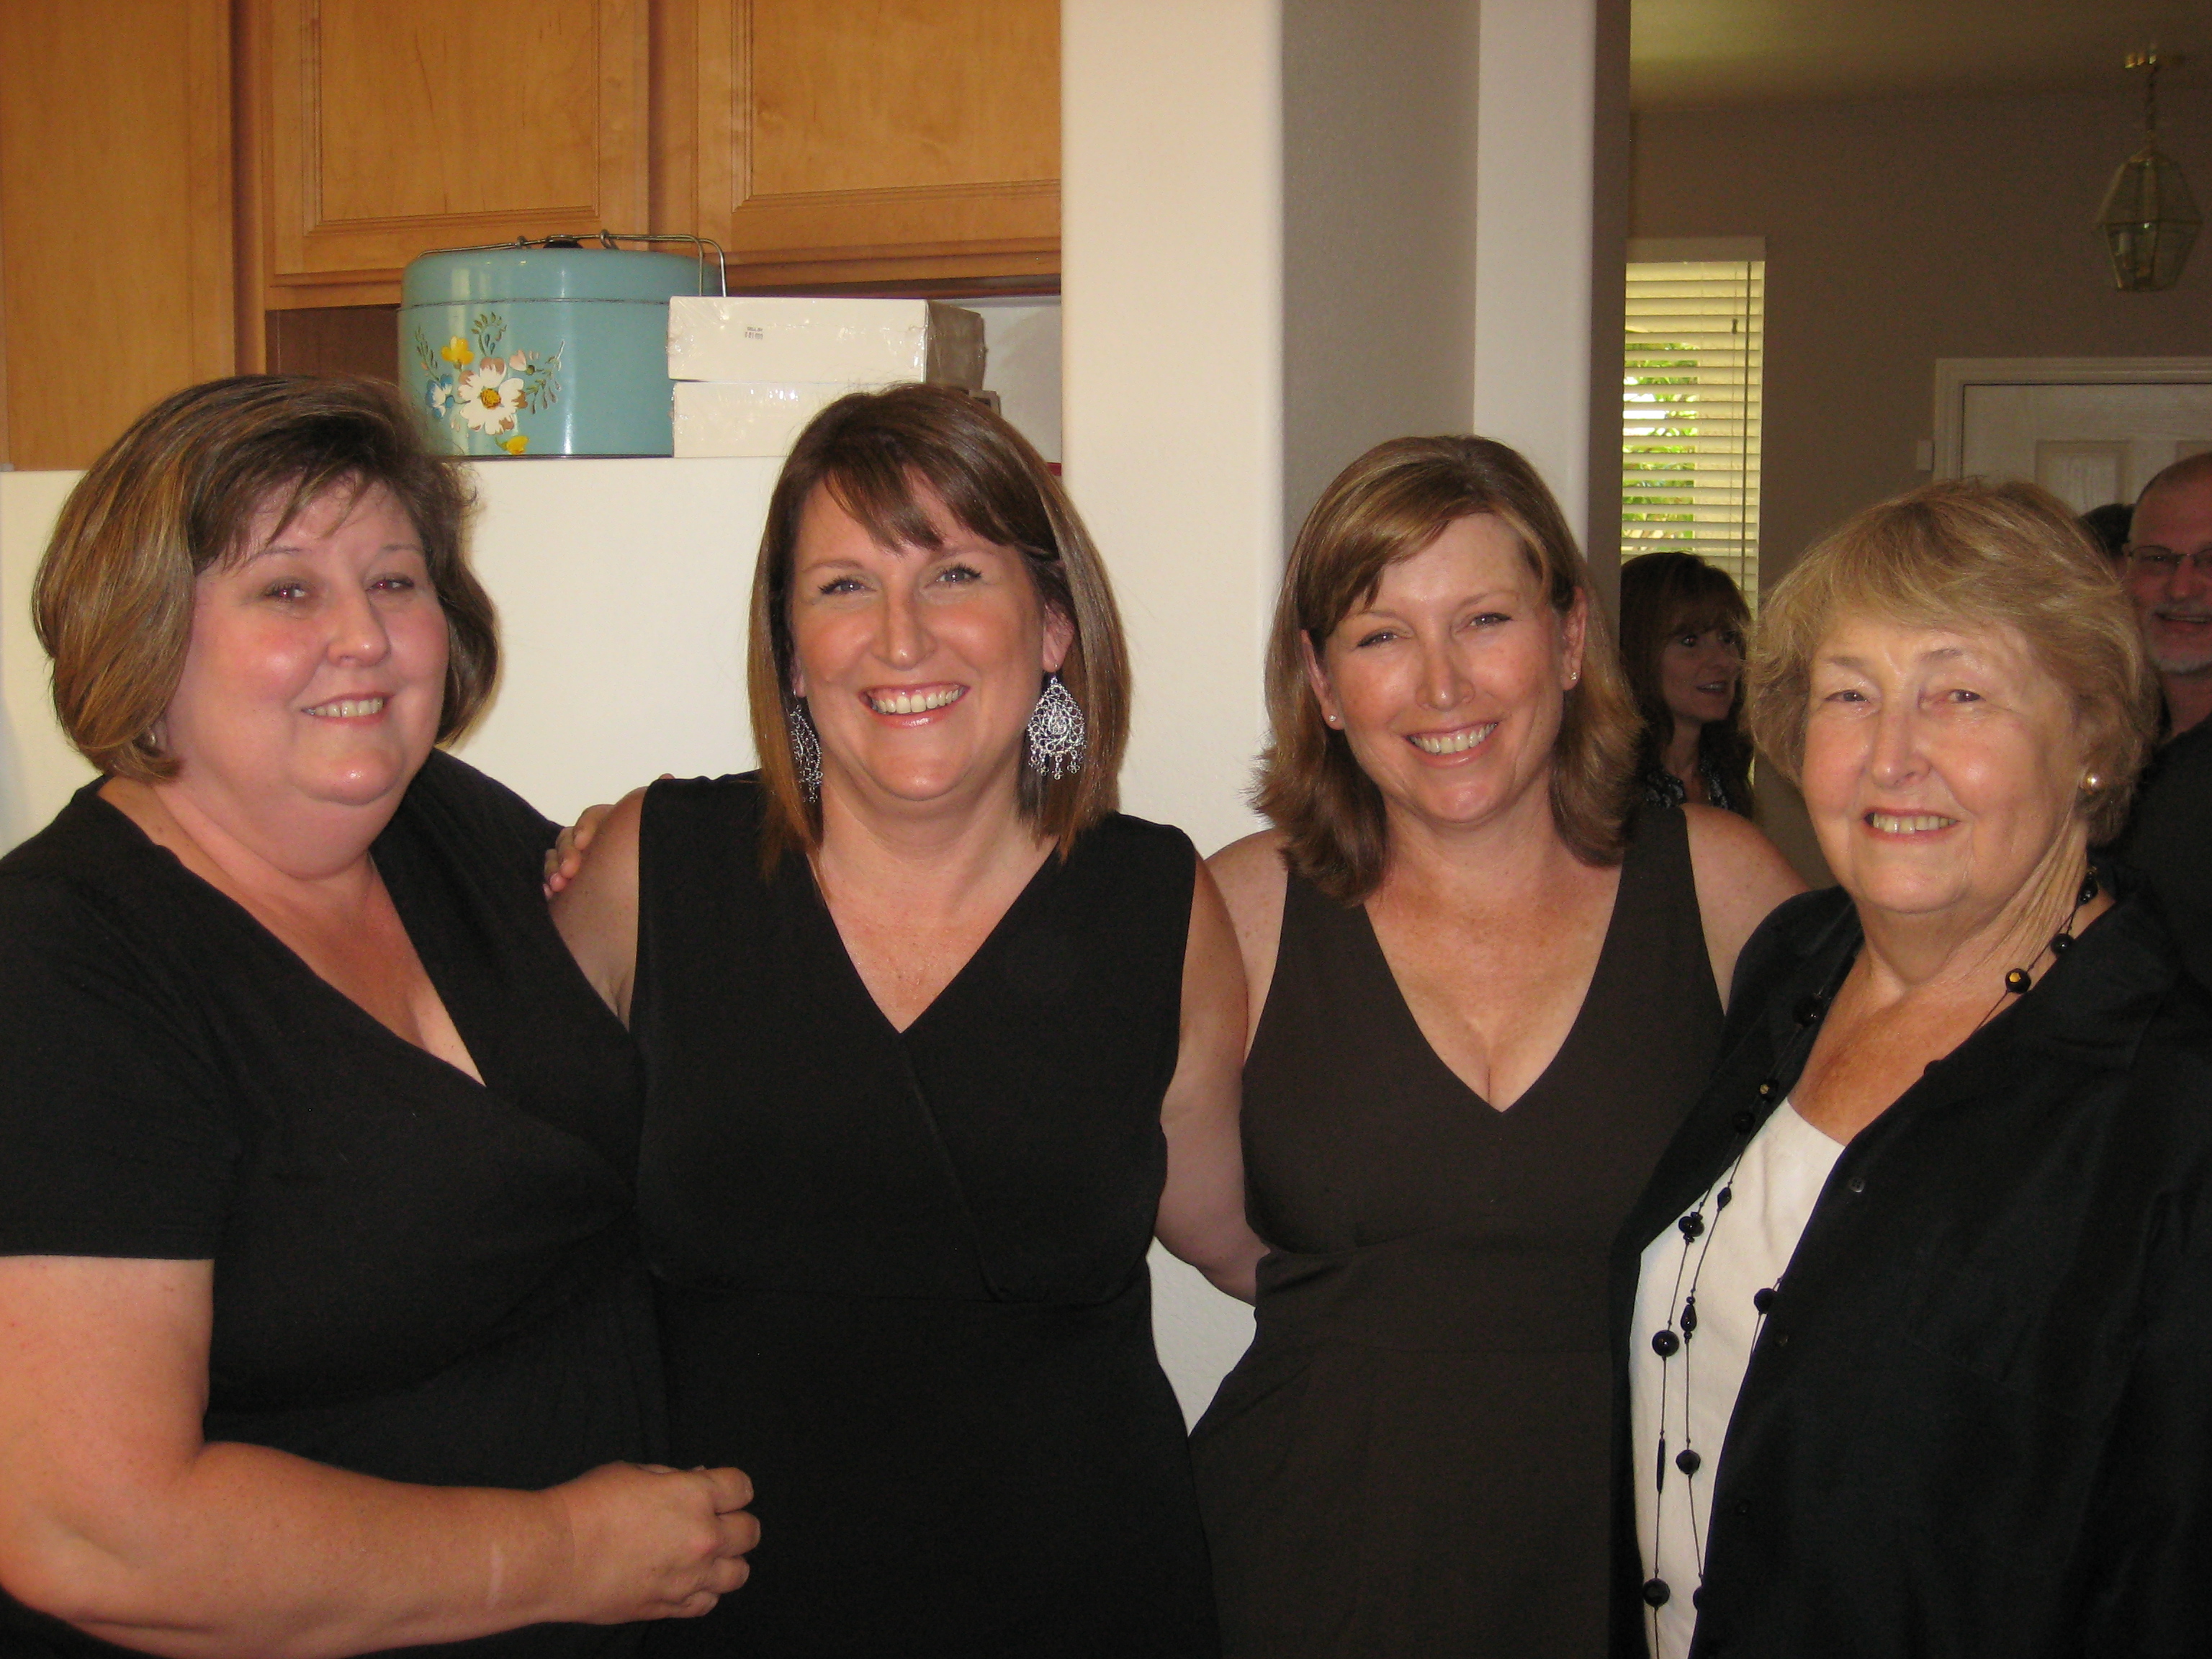 Mary, Katie, Judith, Donna (our mom)